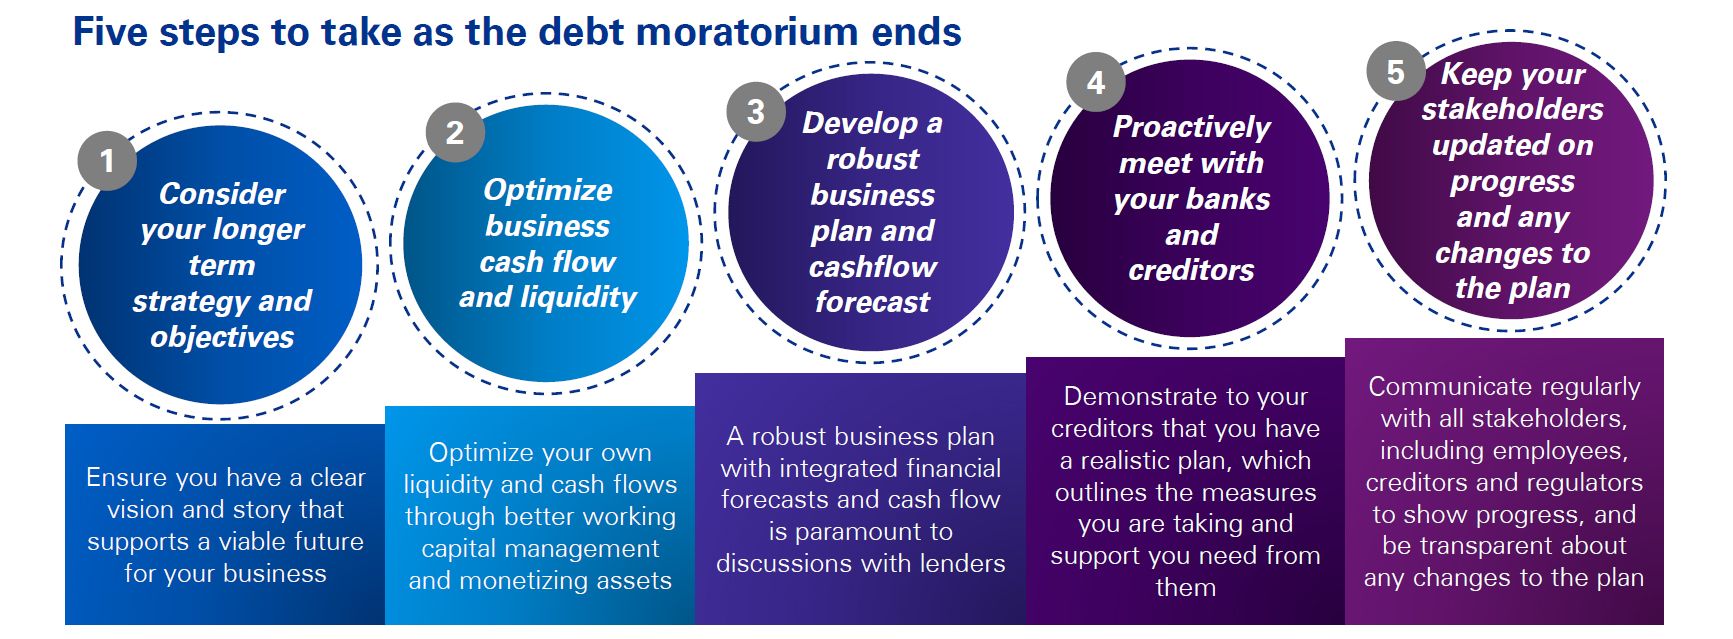 Five steps to take as the debt moratorium ends